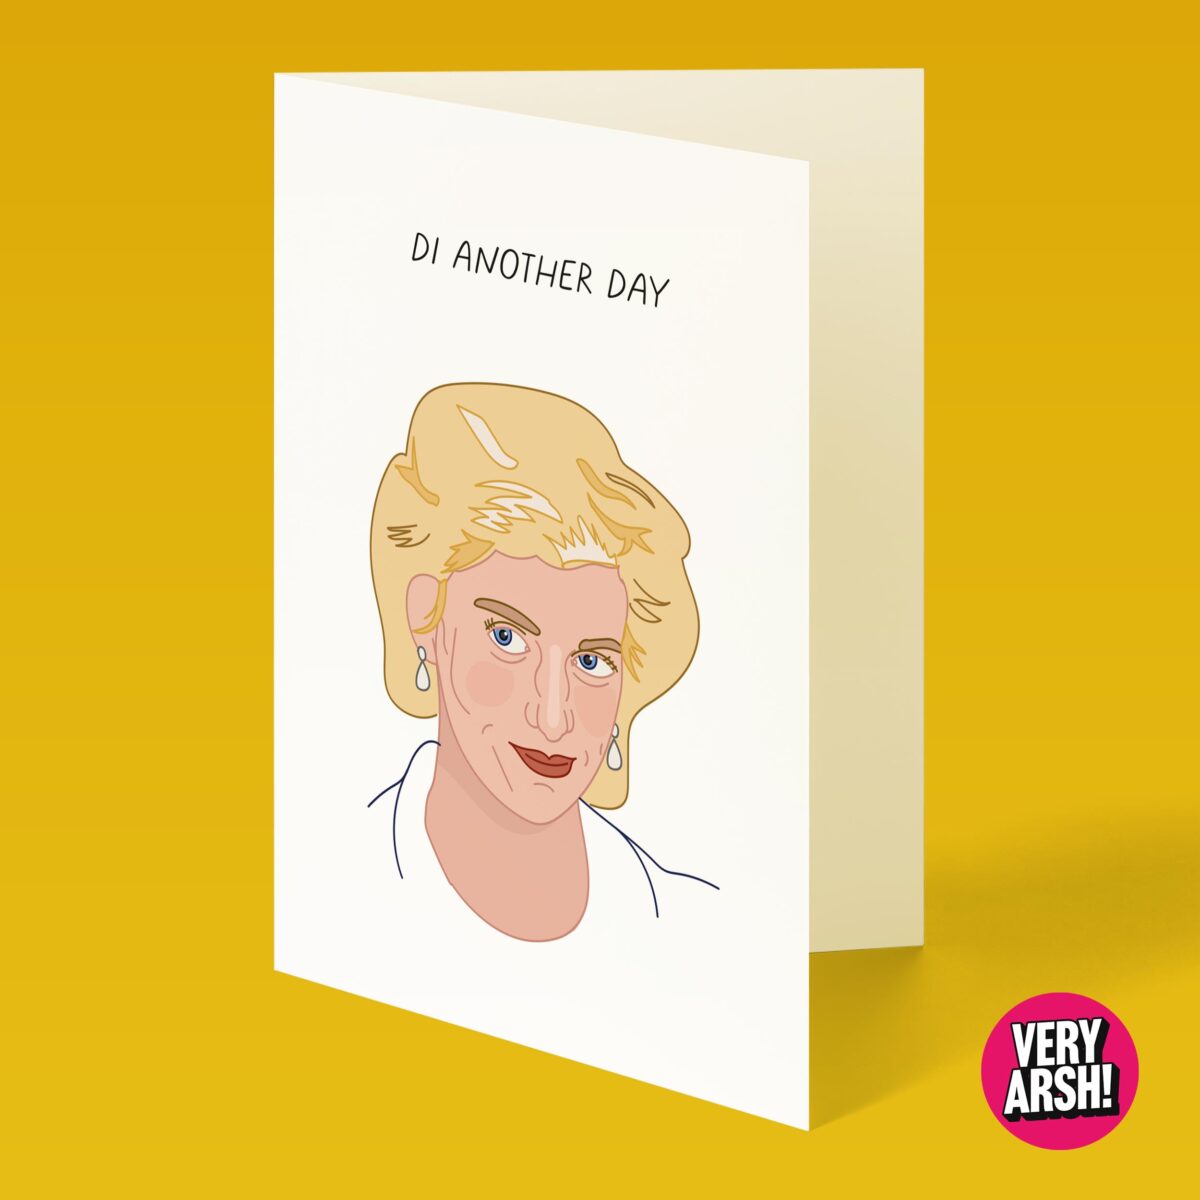 Di Another Day - Lady Diana inspired Birthday Card, Thank You Card, Valentine's Day Card, Christmas Card